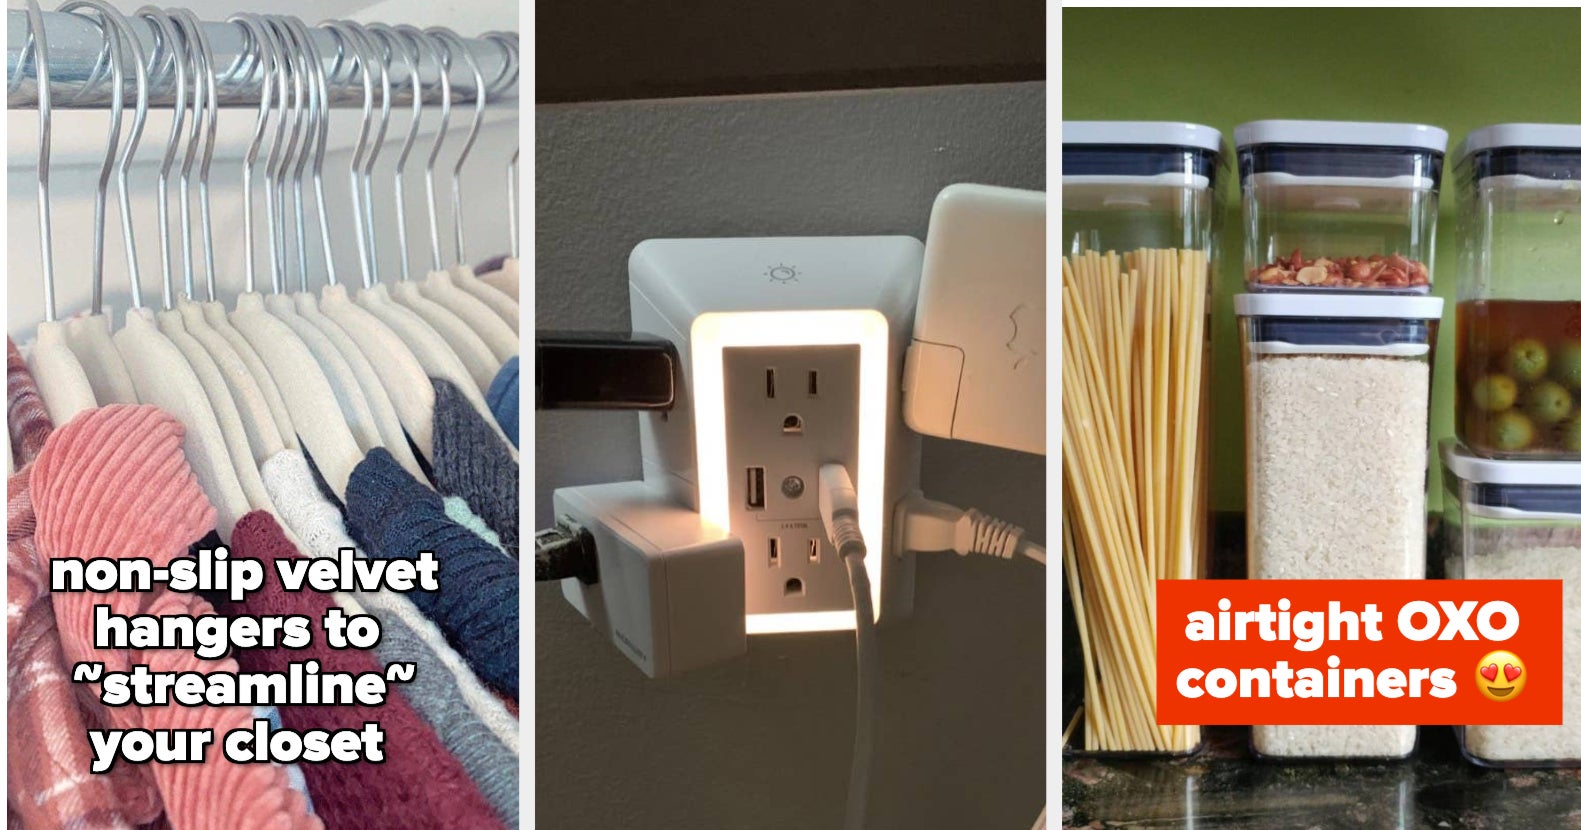 49 Things To Help Anyone Whose Home Could Best Be Described As "A Mess"